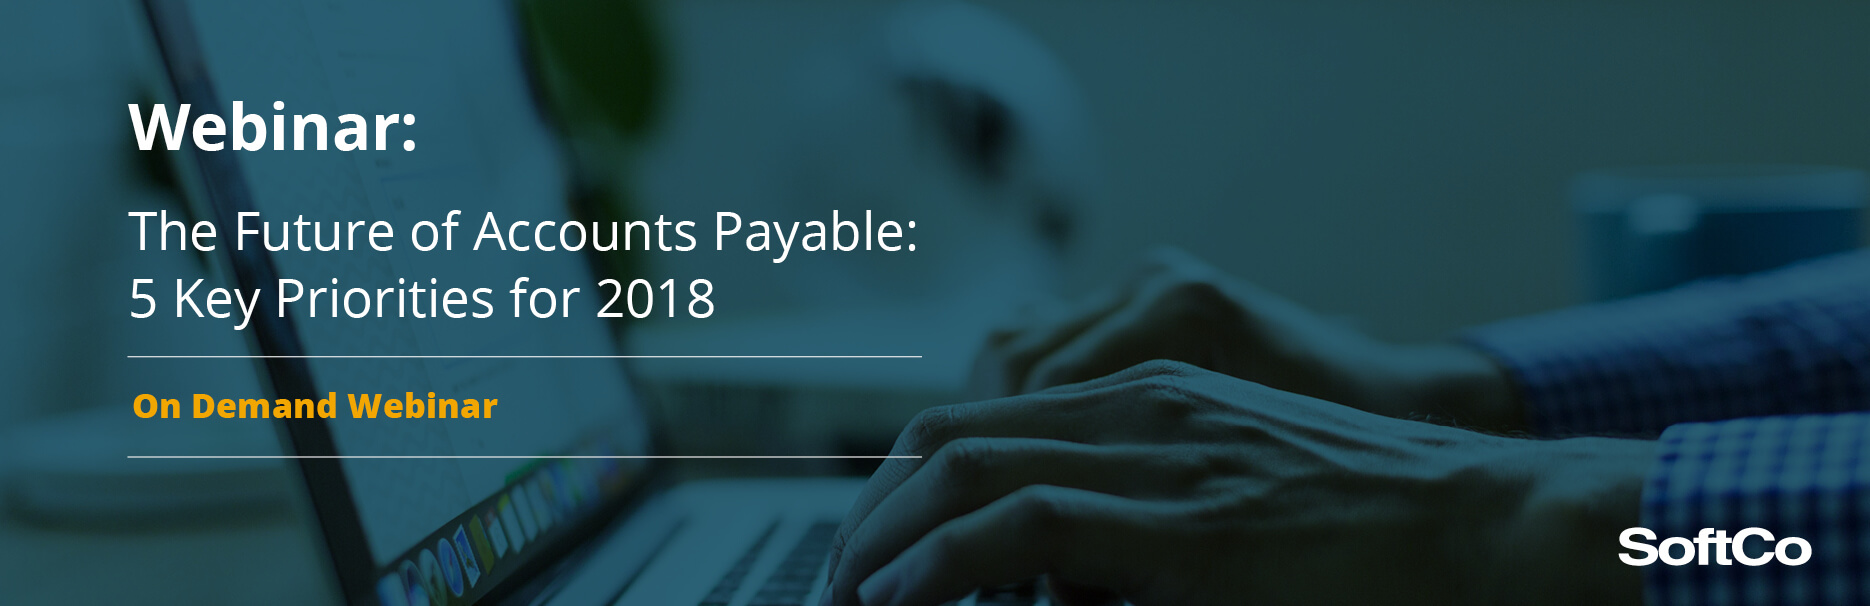 Webinar: The Future of Accounts Payable: 5 Key Priorities for 2018